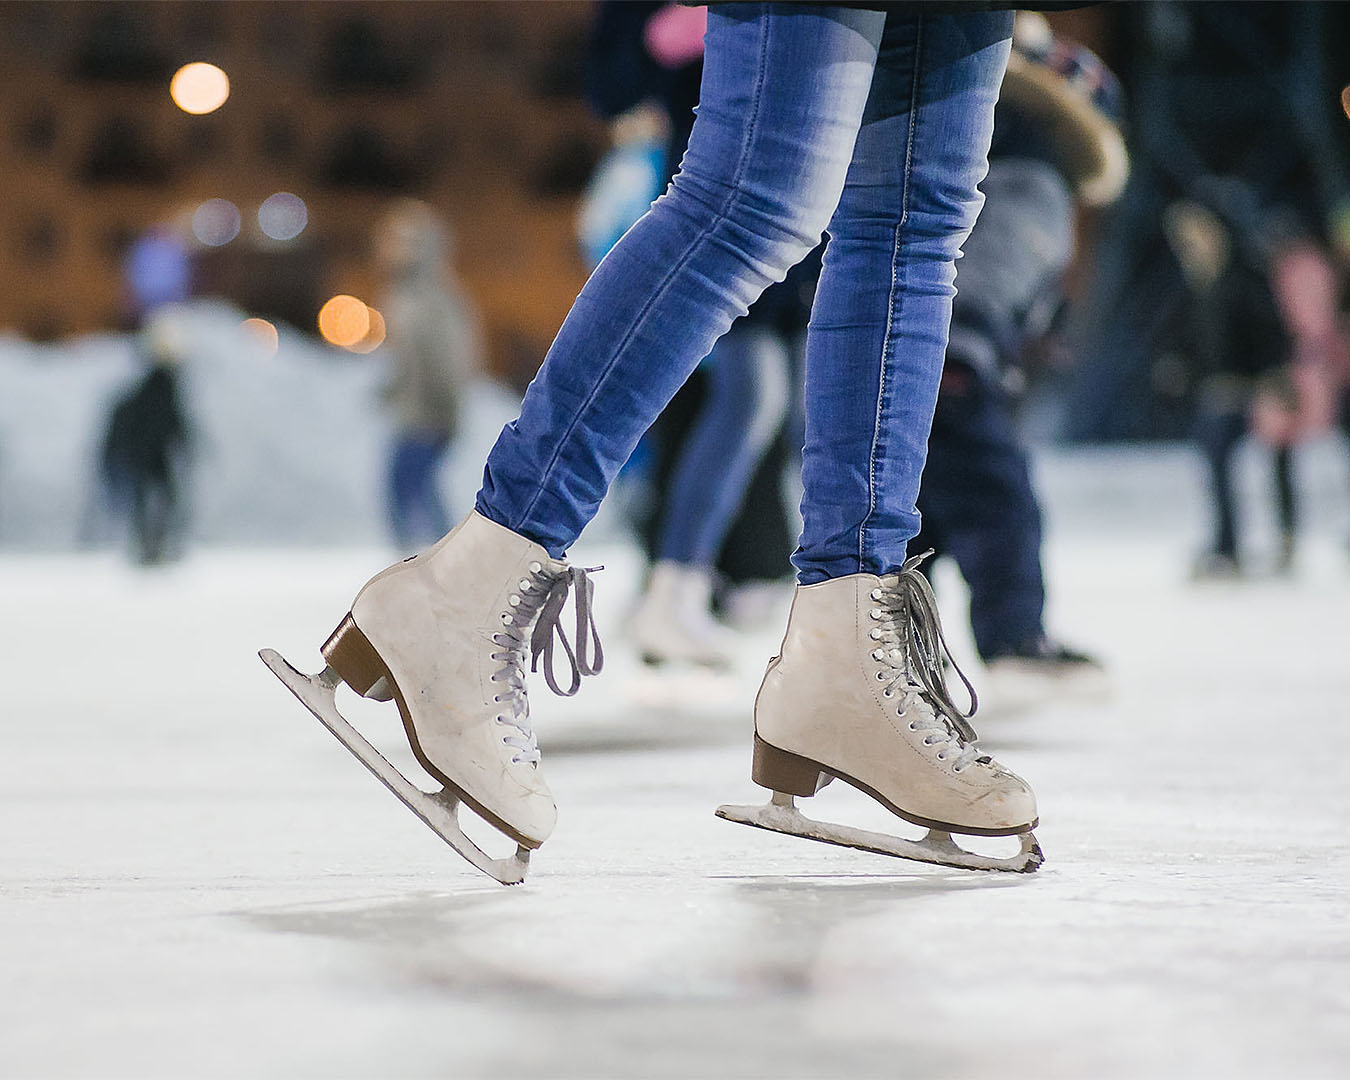 A woman in skates on the ice at Paradice.